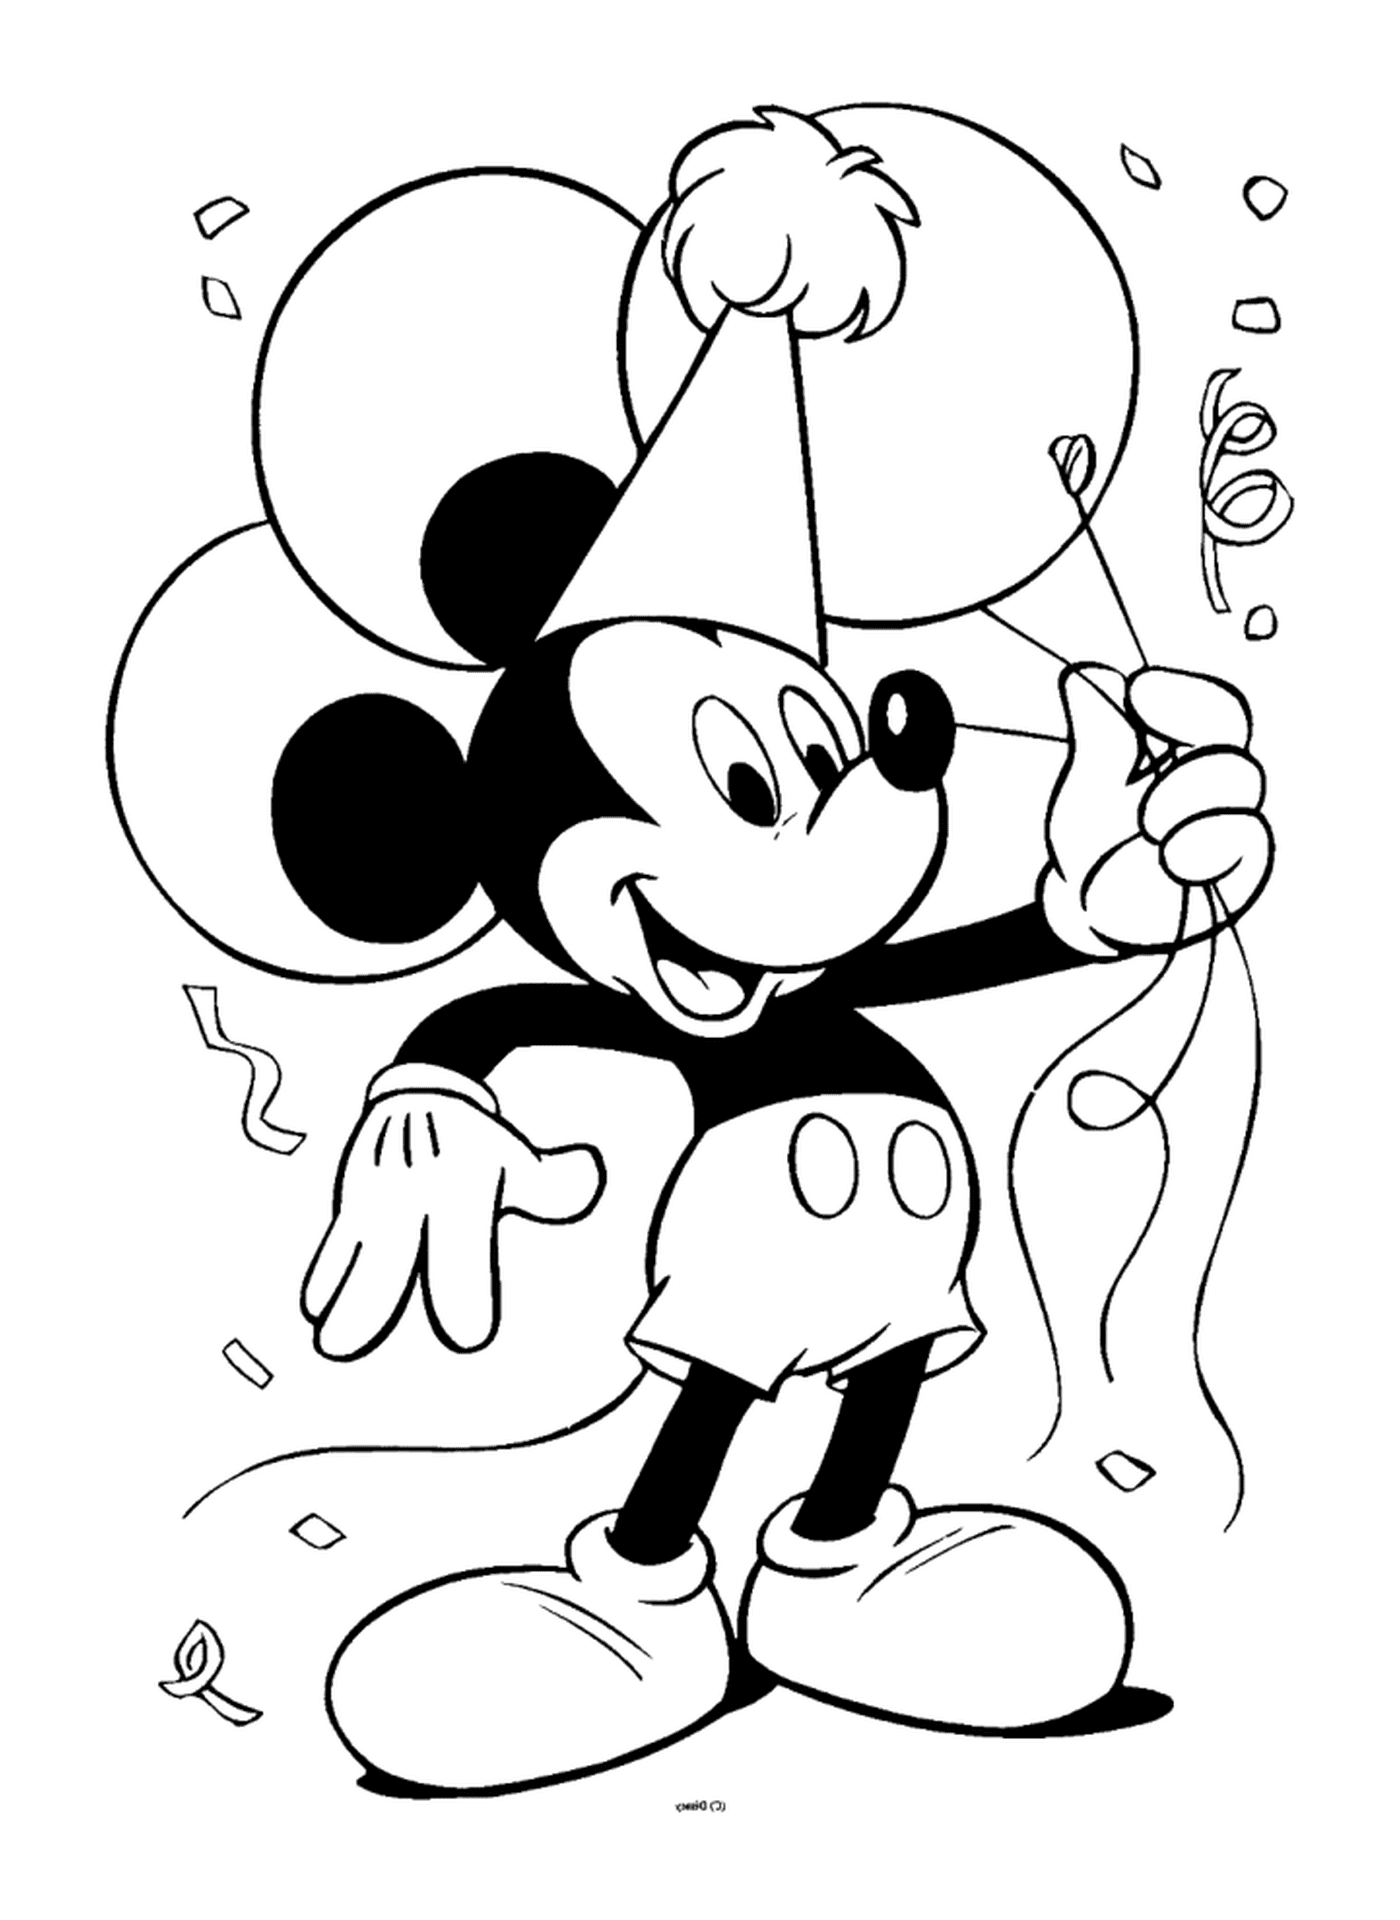  It's Mickey's birthday with balloons 